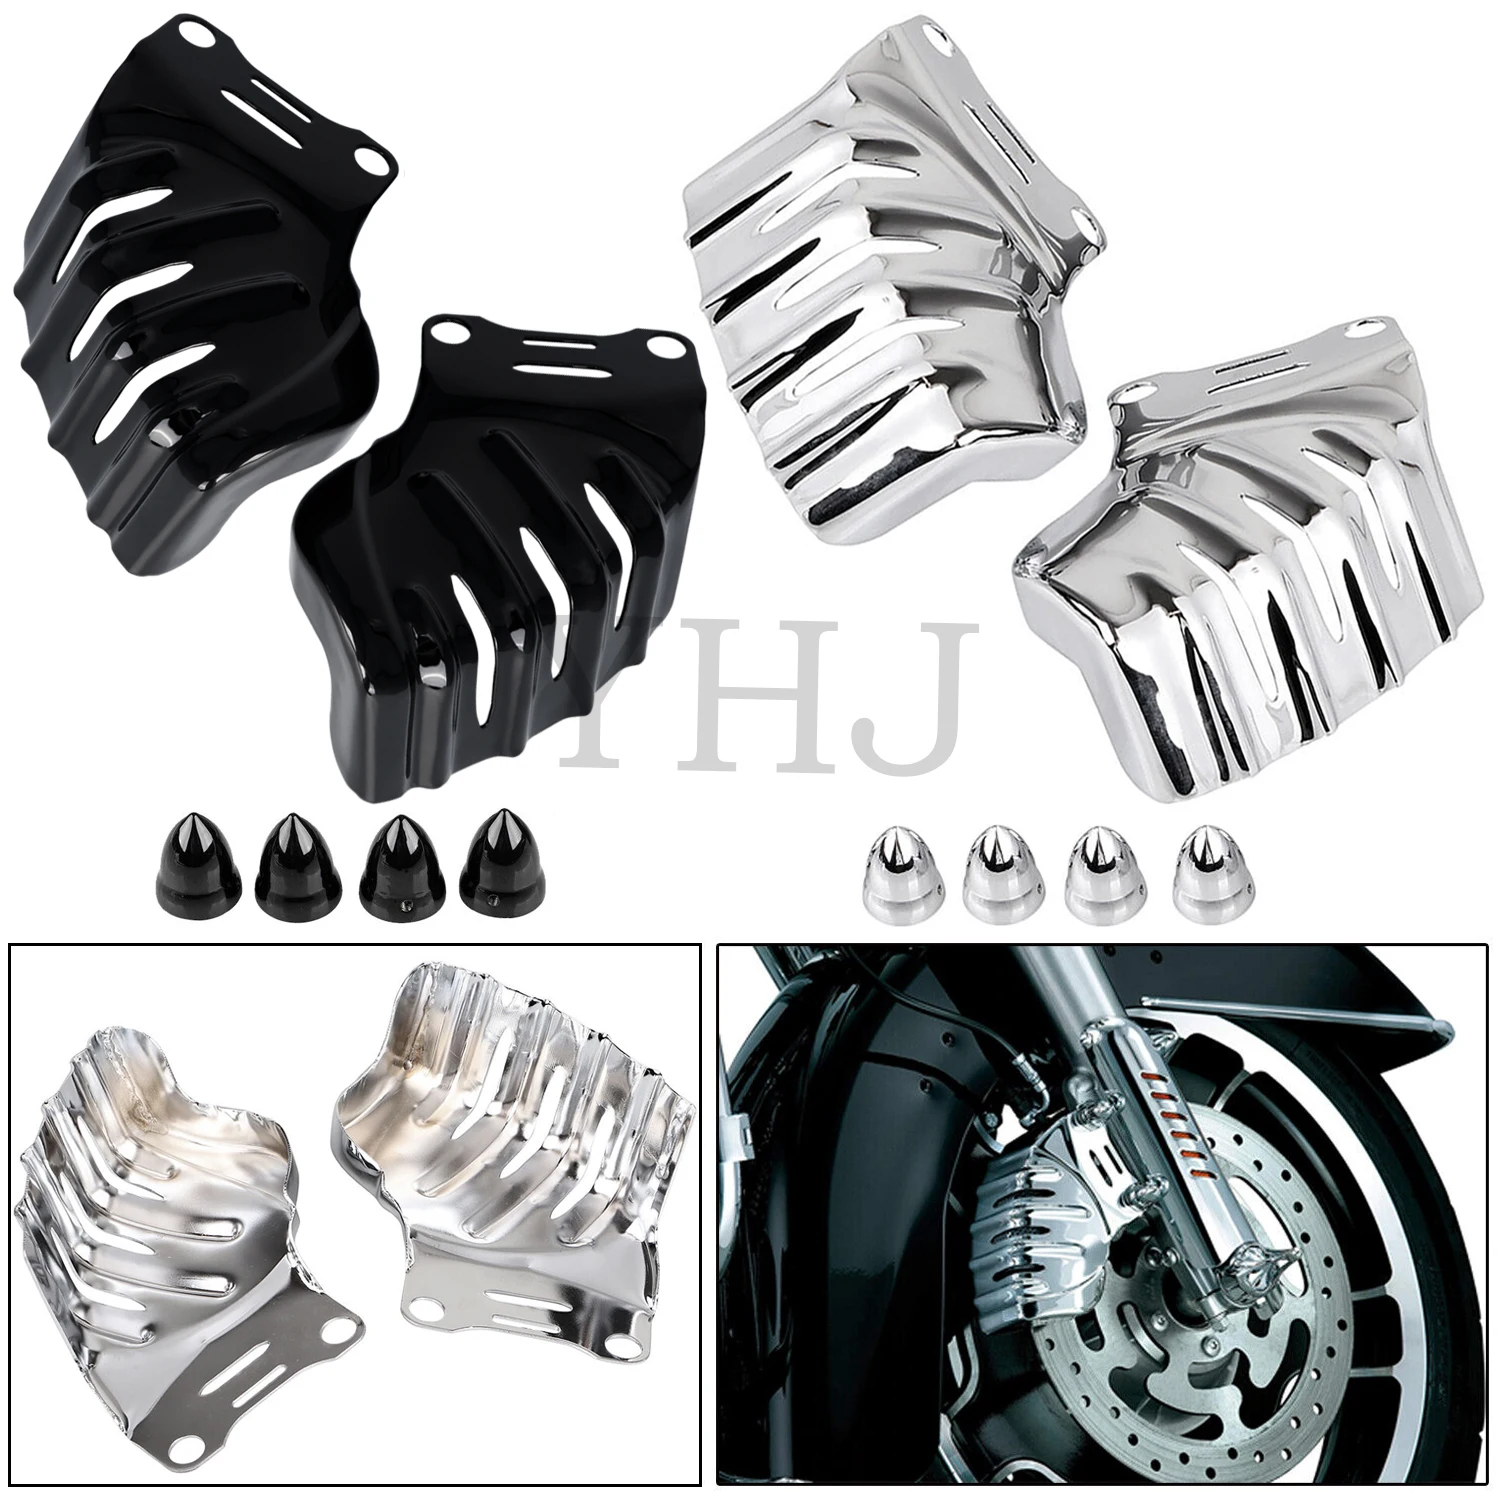 

Motorcycle Front Brake Caliper Cover Black/Chrome For Harley Touring Electra Street Road Glide FLHX CVO FLHXSE FLTRXS Road King